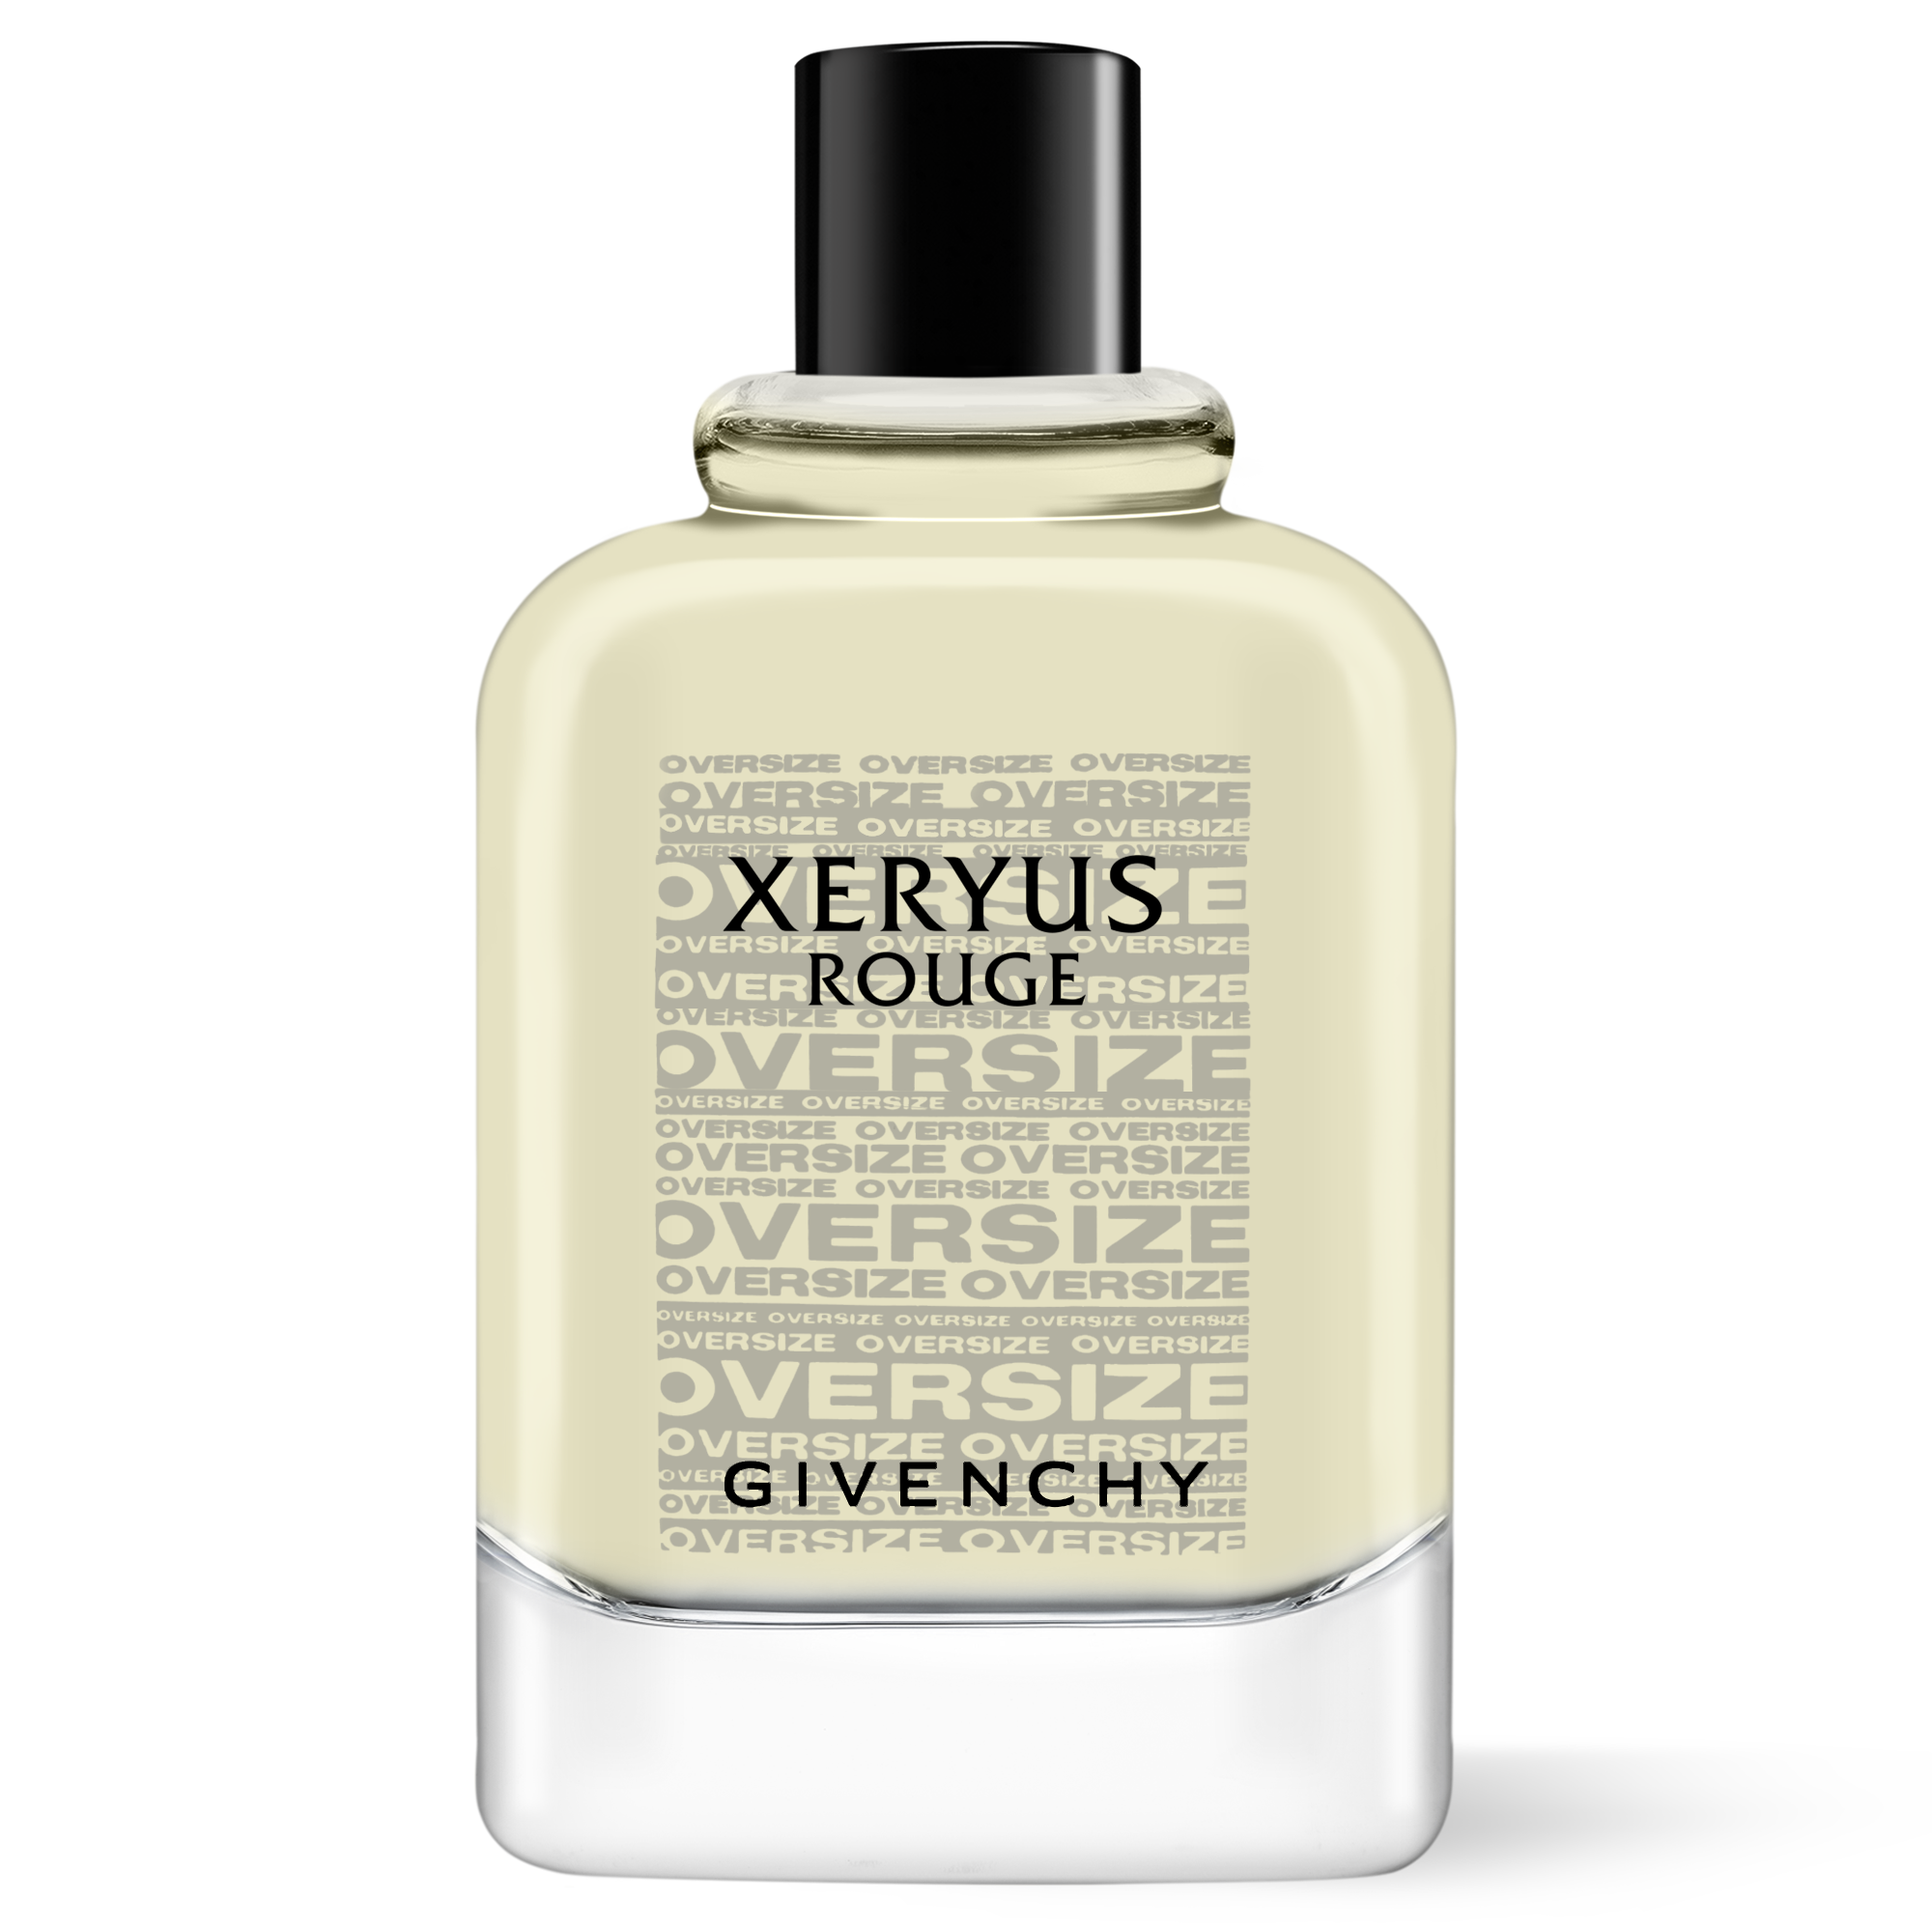 xeryus by givenchy